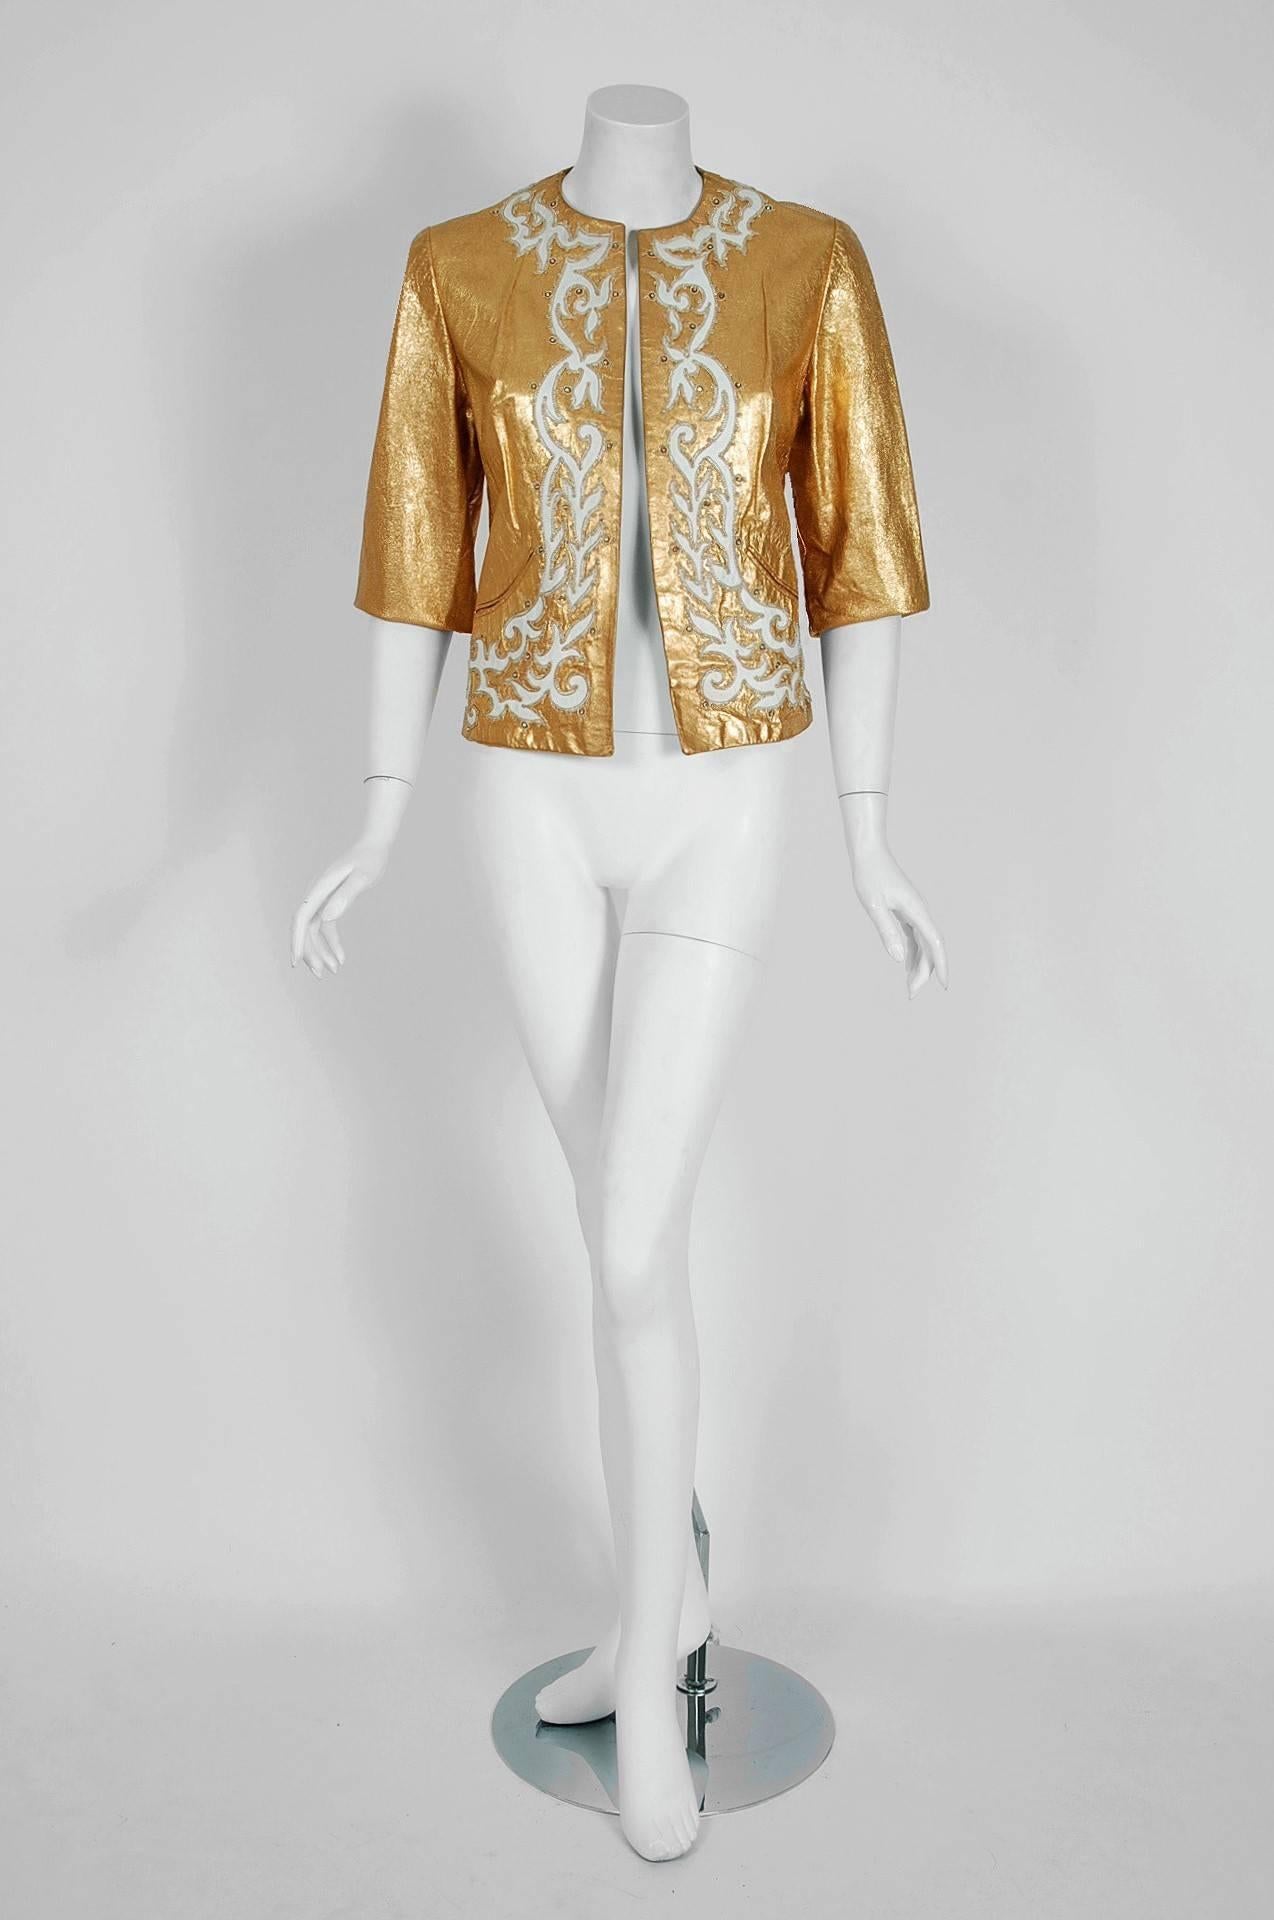 Spectacular metallic-gold cropped jacket by California designer Jacques Suedes. This rare and exquisite ladies rhinestone studded and embroidered leather jacket is the pinnacle holy grail garment for anyone bent on collecting those 